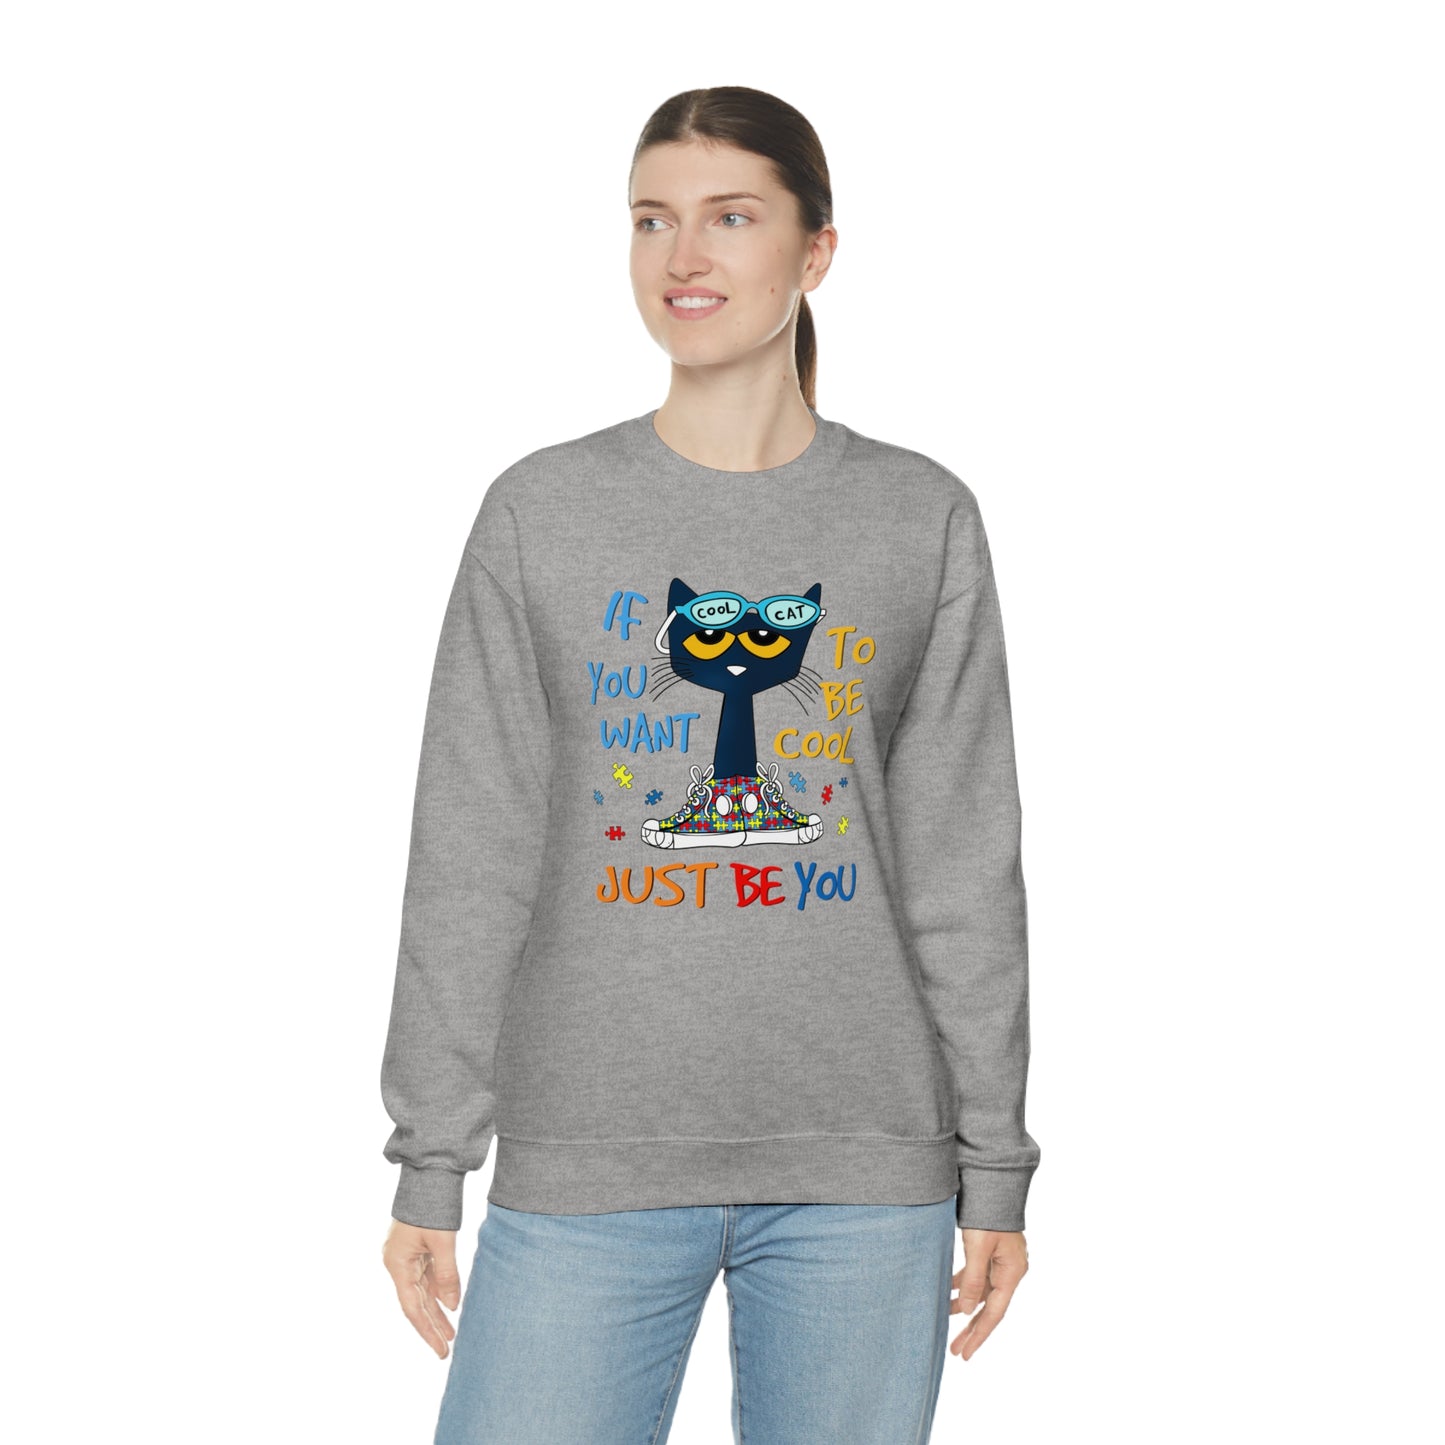 If You Want To Be Cool Just Be You - Pete Sweatshirt